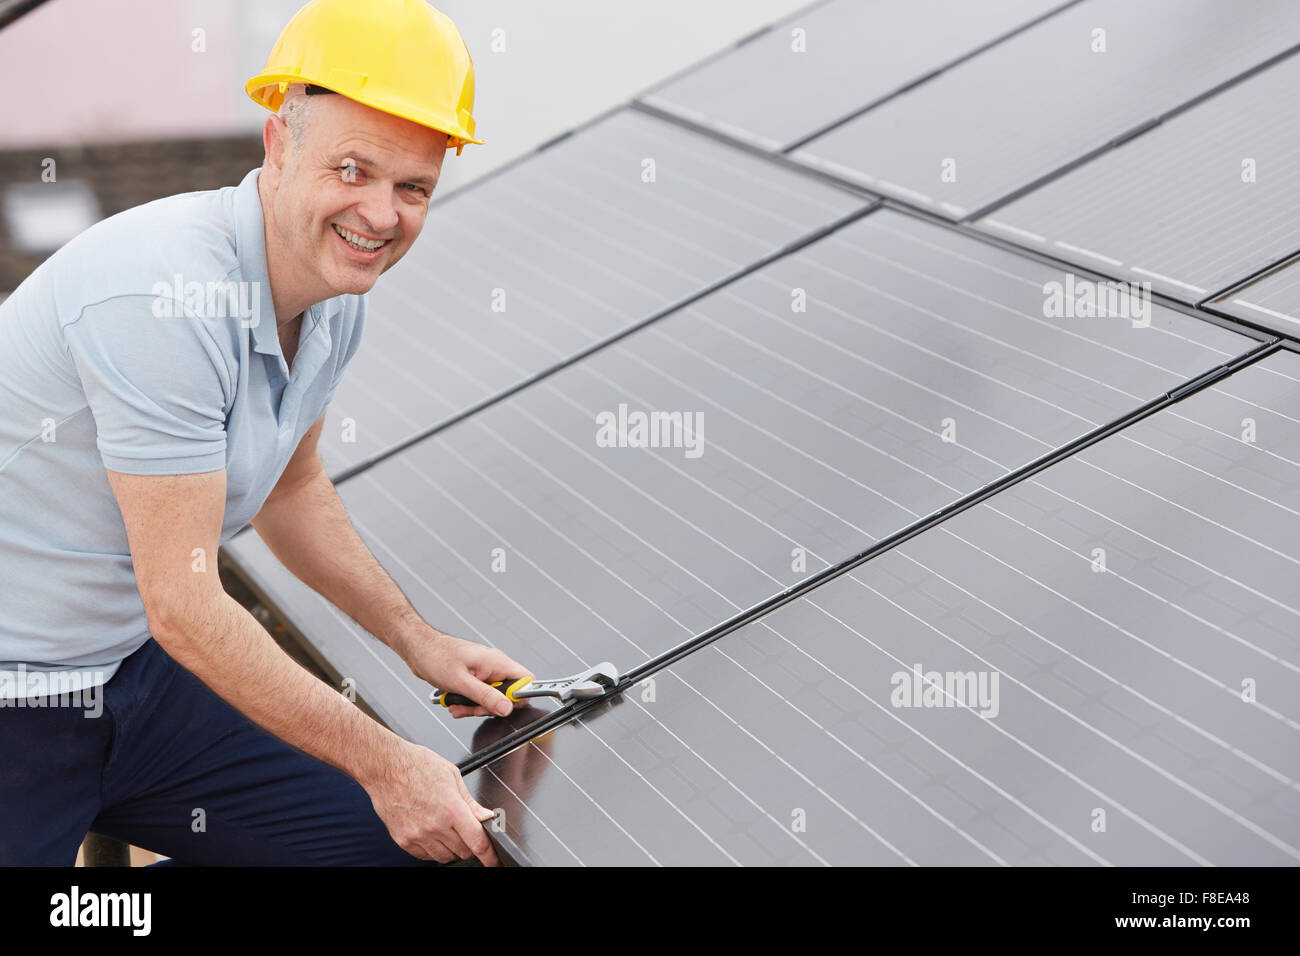 Engineer Installing Solar Panels On Roof Of House Stock Photo